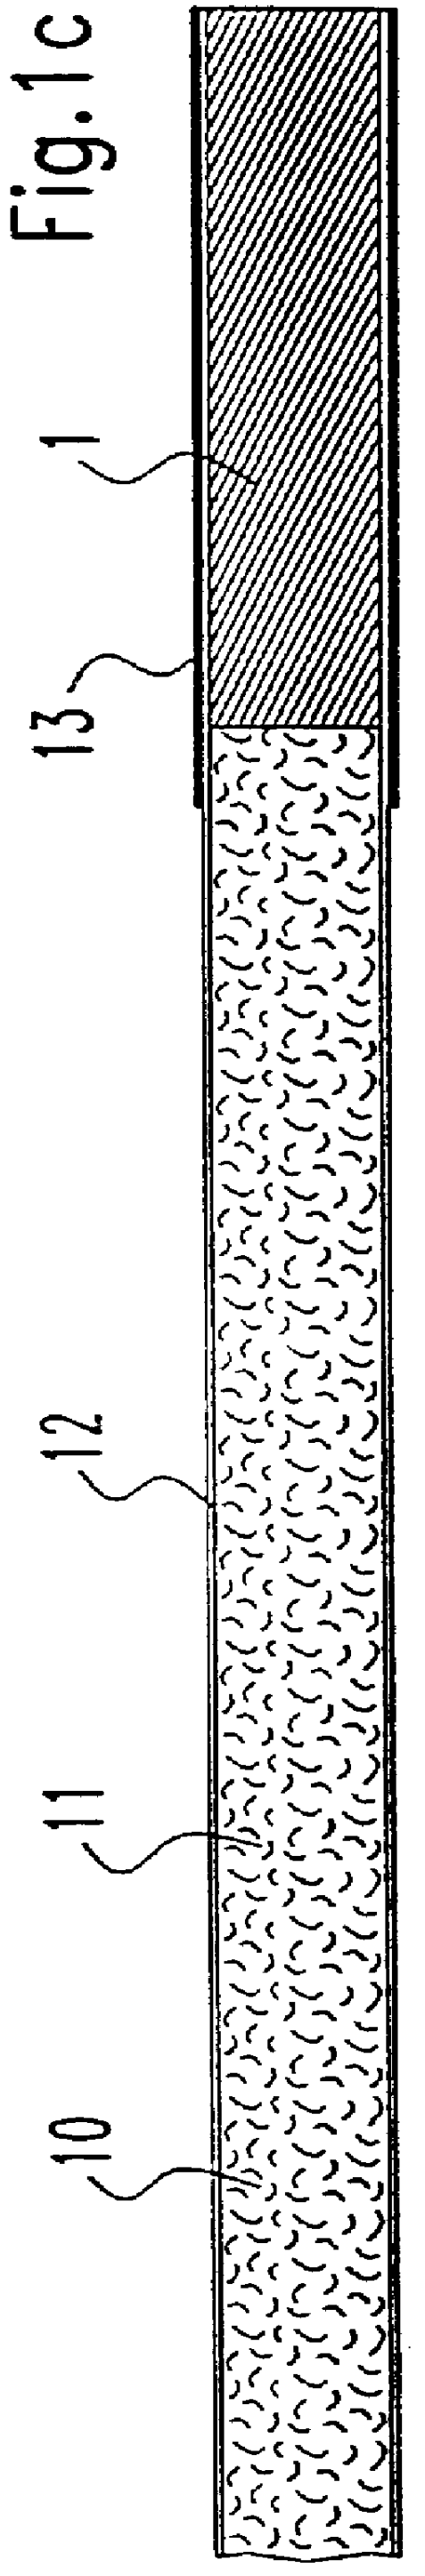 Biodegradable filter material and method for its manufacture